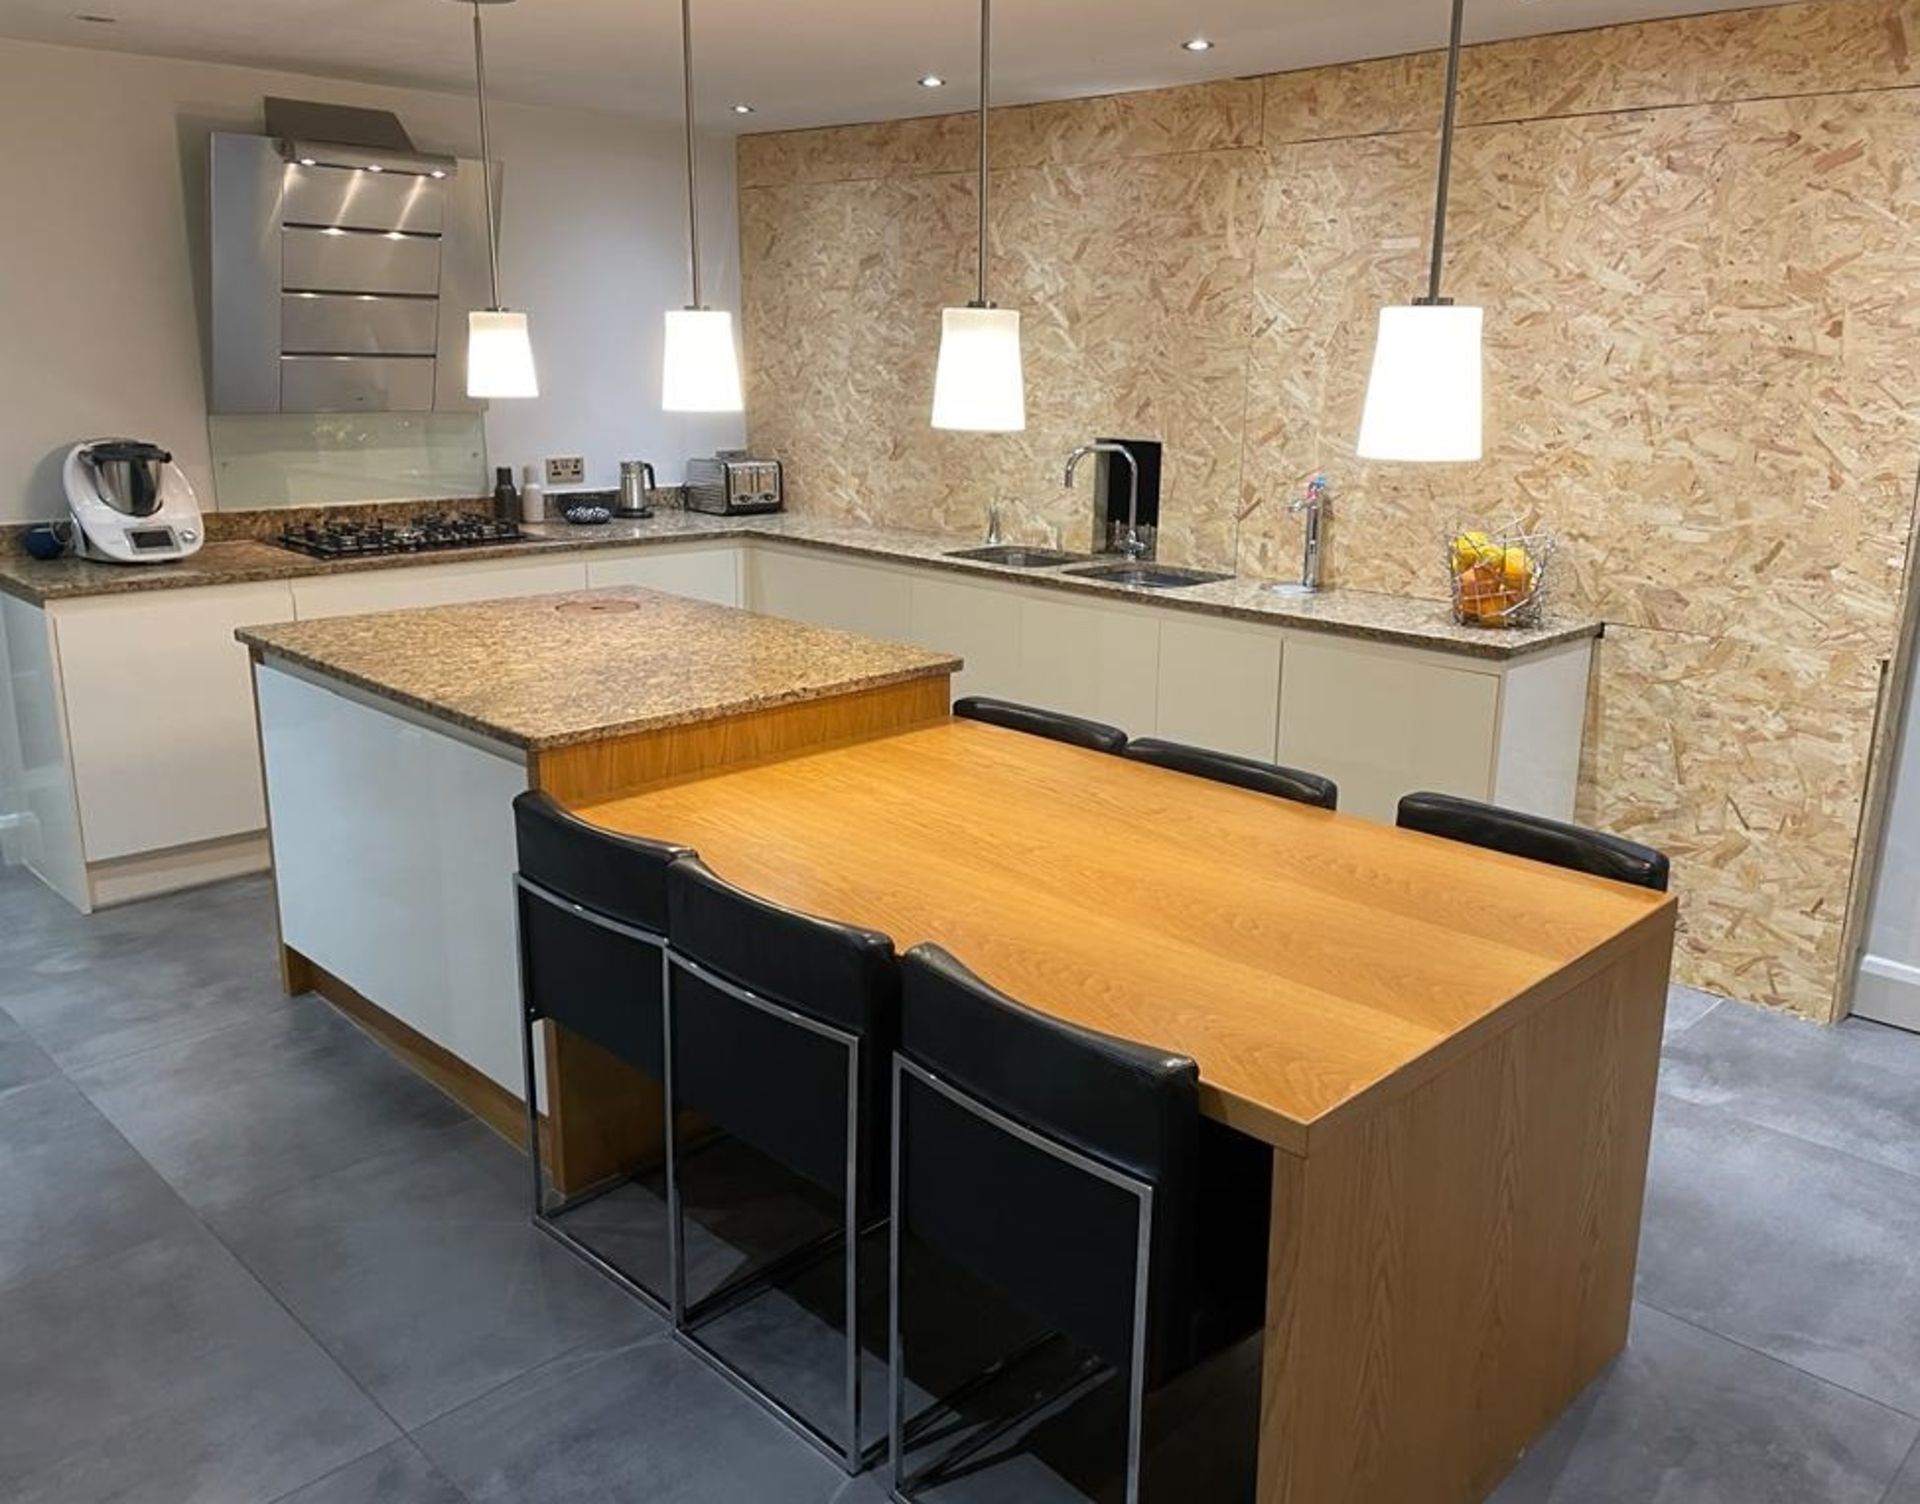 1 x Stunning PARAPAN Handleless Fitted Kitchen with Neff Appliances, Granite Worktops & Island - Image 114 of 126